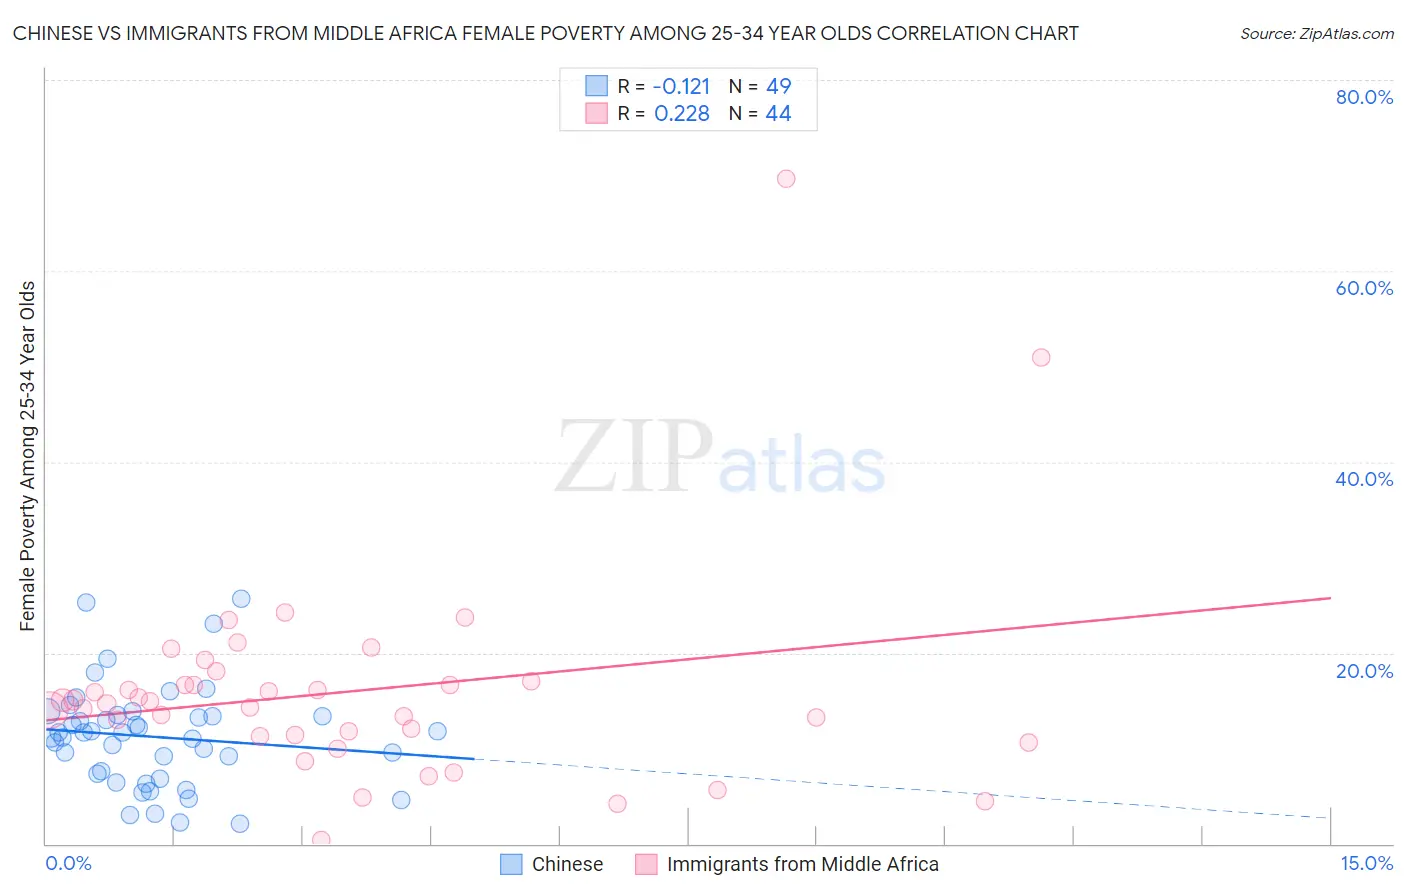 Chinese vs Immigrants from Middle Africa Female Poverty Among 25-34 Year Olds